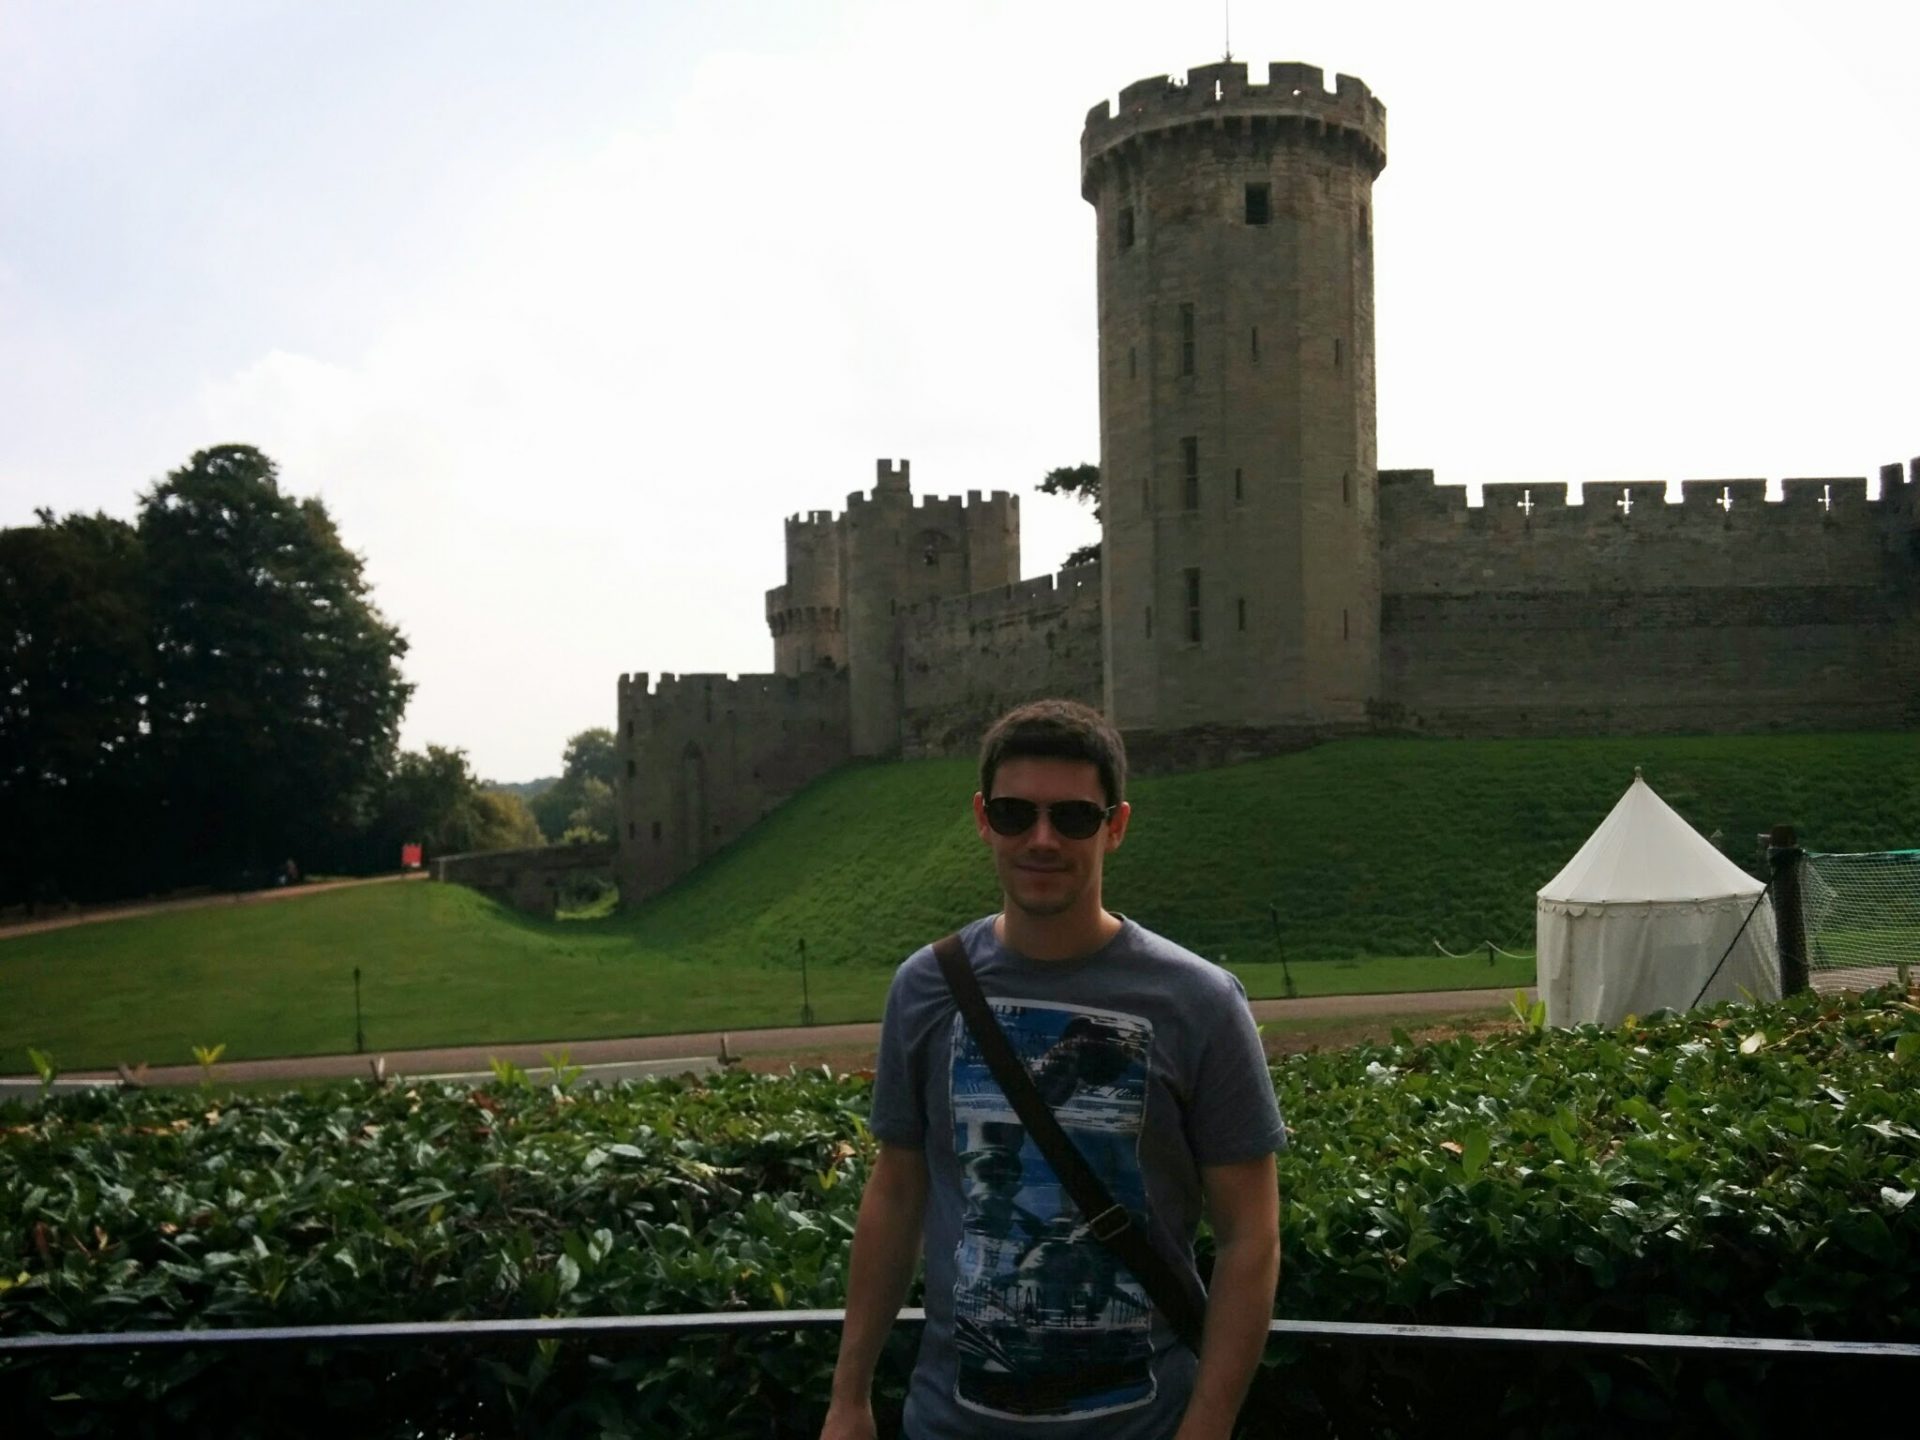 Me with Guy's Tower in the background